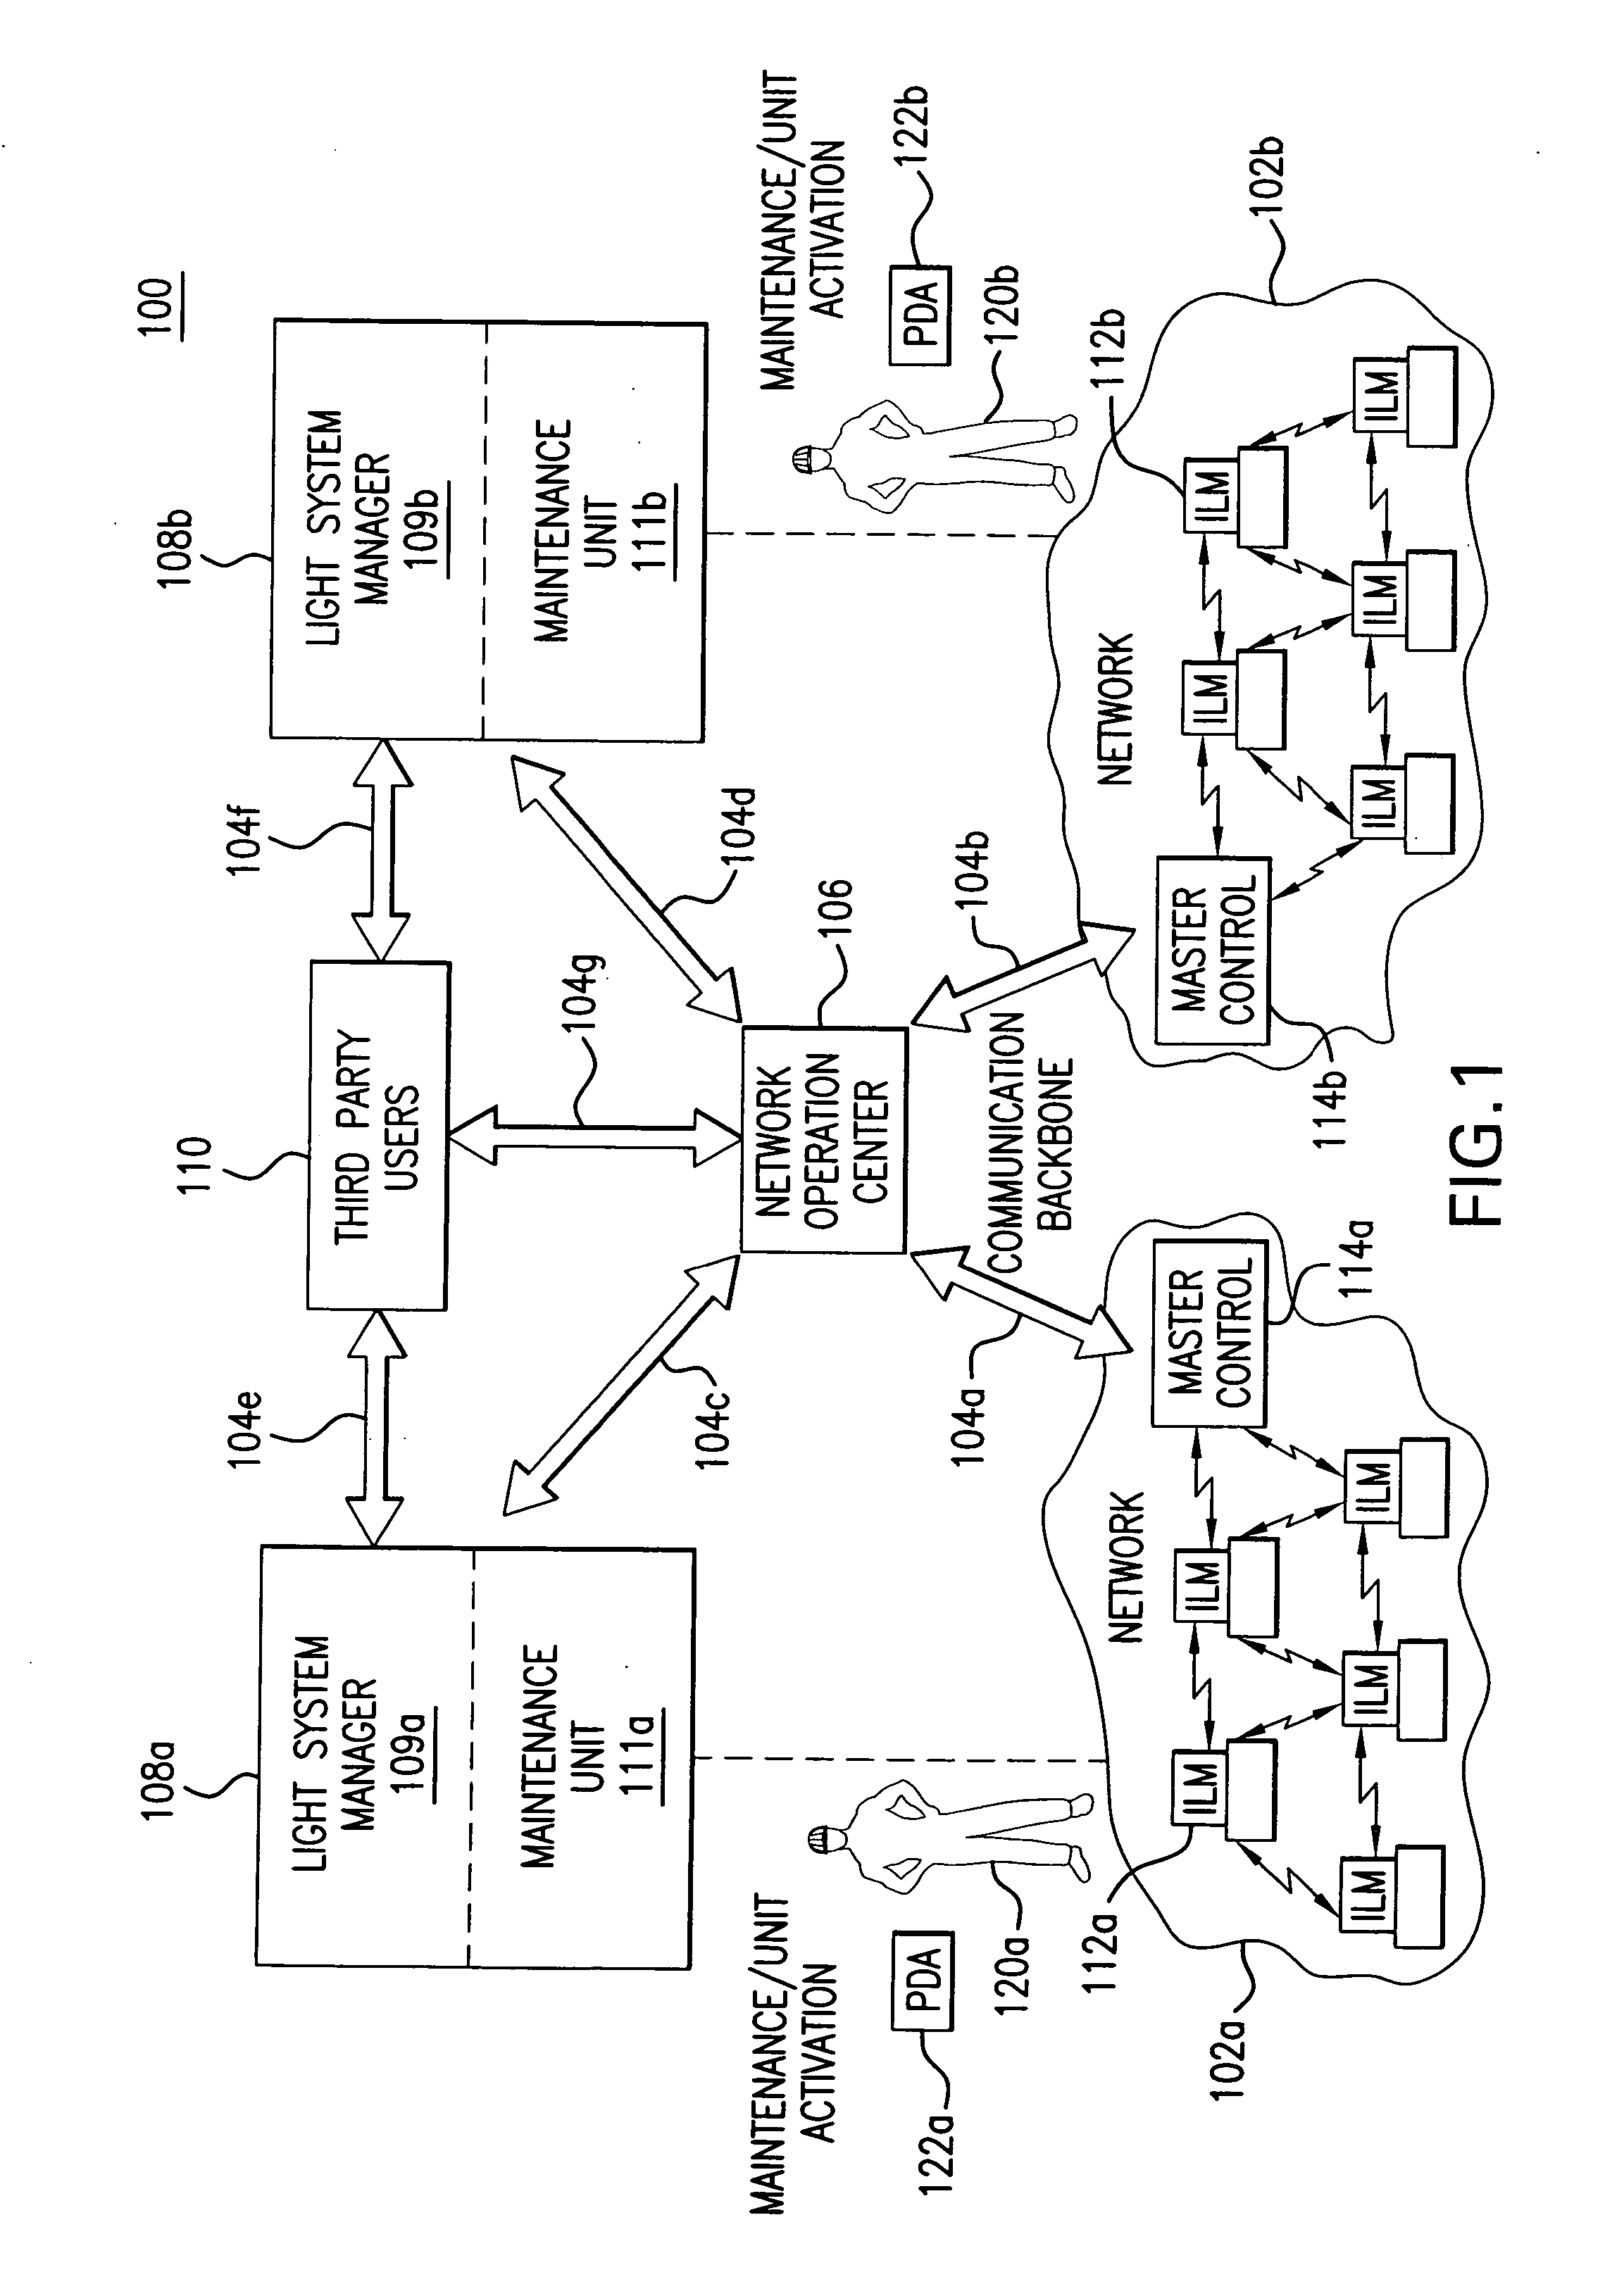 Light management system having networked intelligent luminaire managers with enhanced diagnostics capabilities